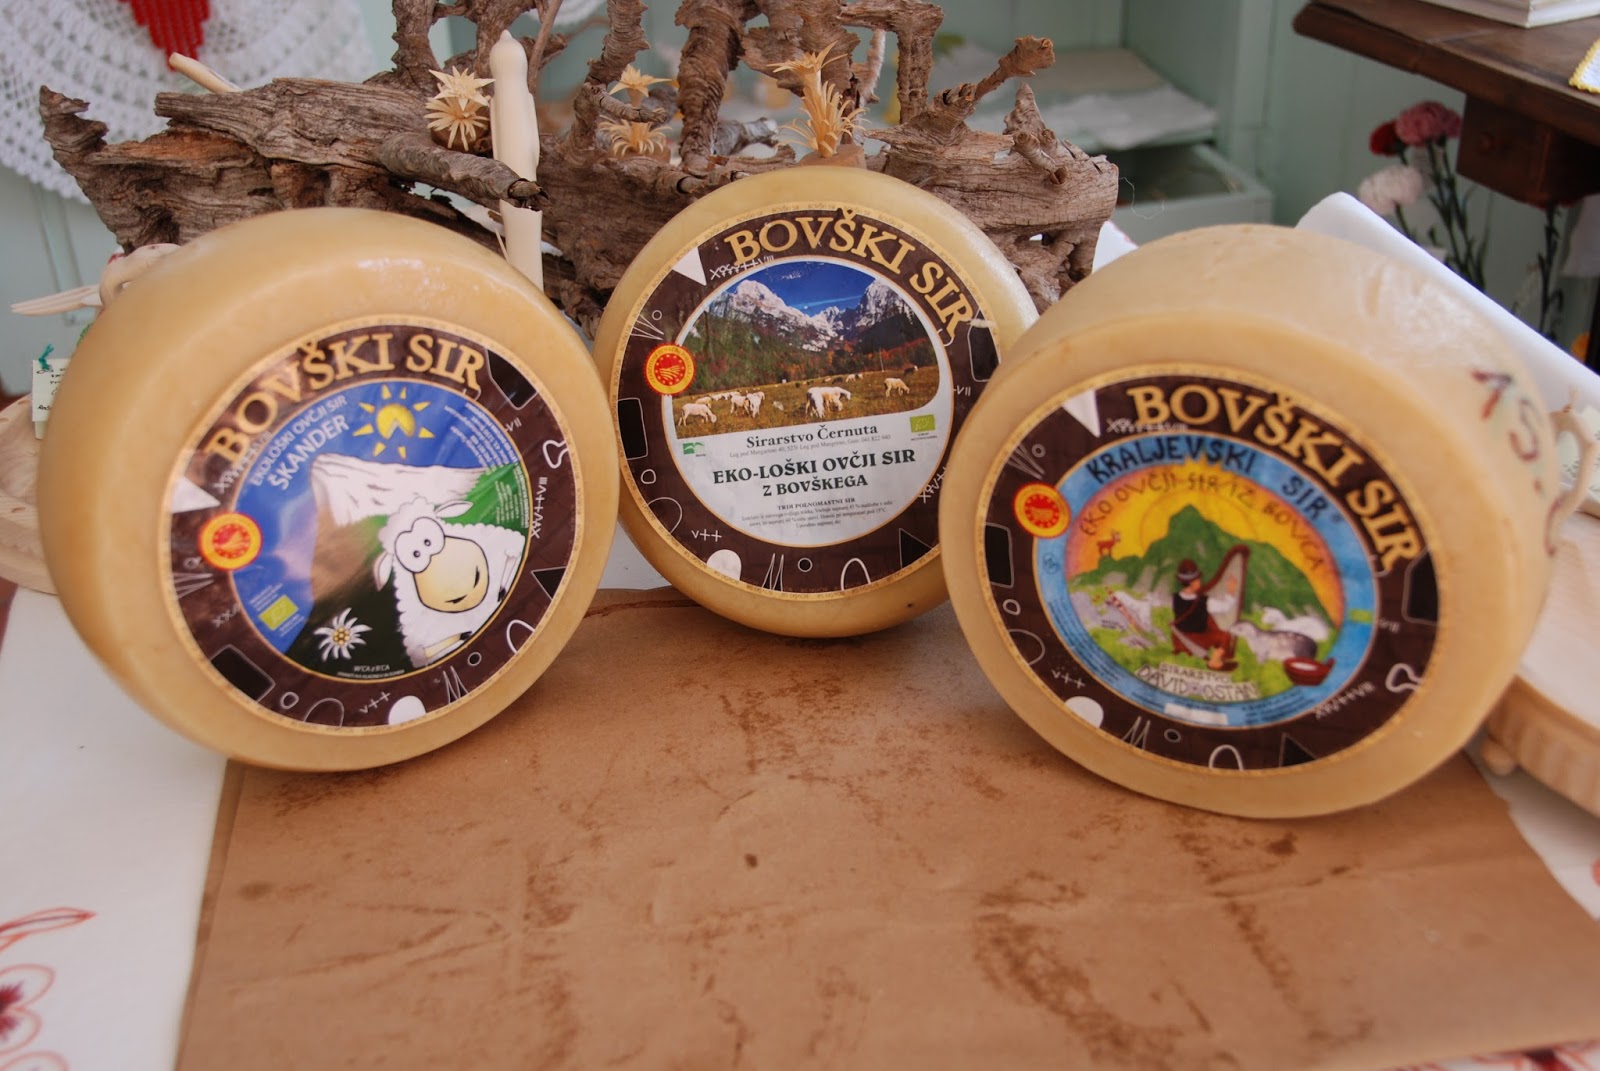 Bovec cheese-making is unique culture to the Slovenian Alps.